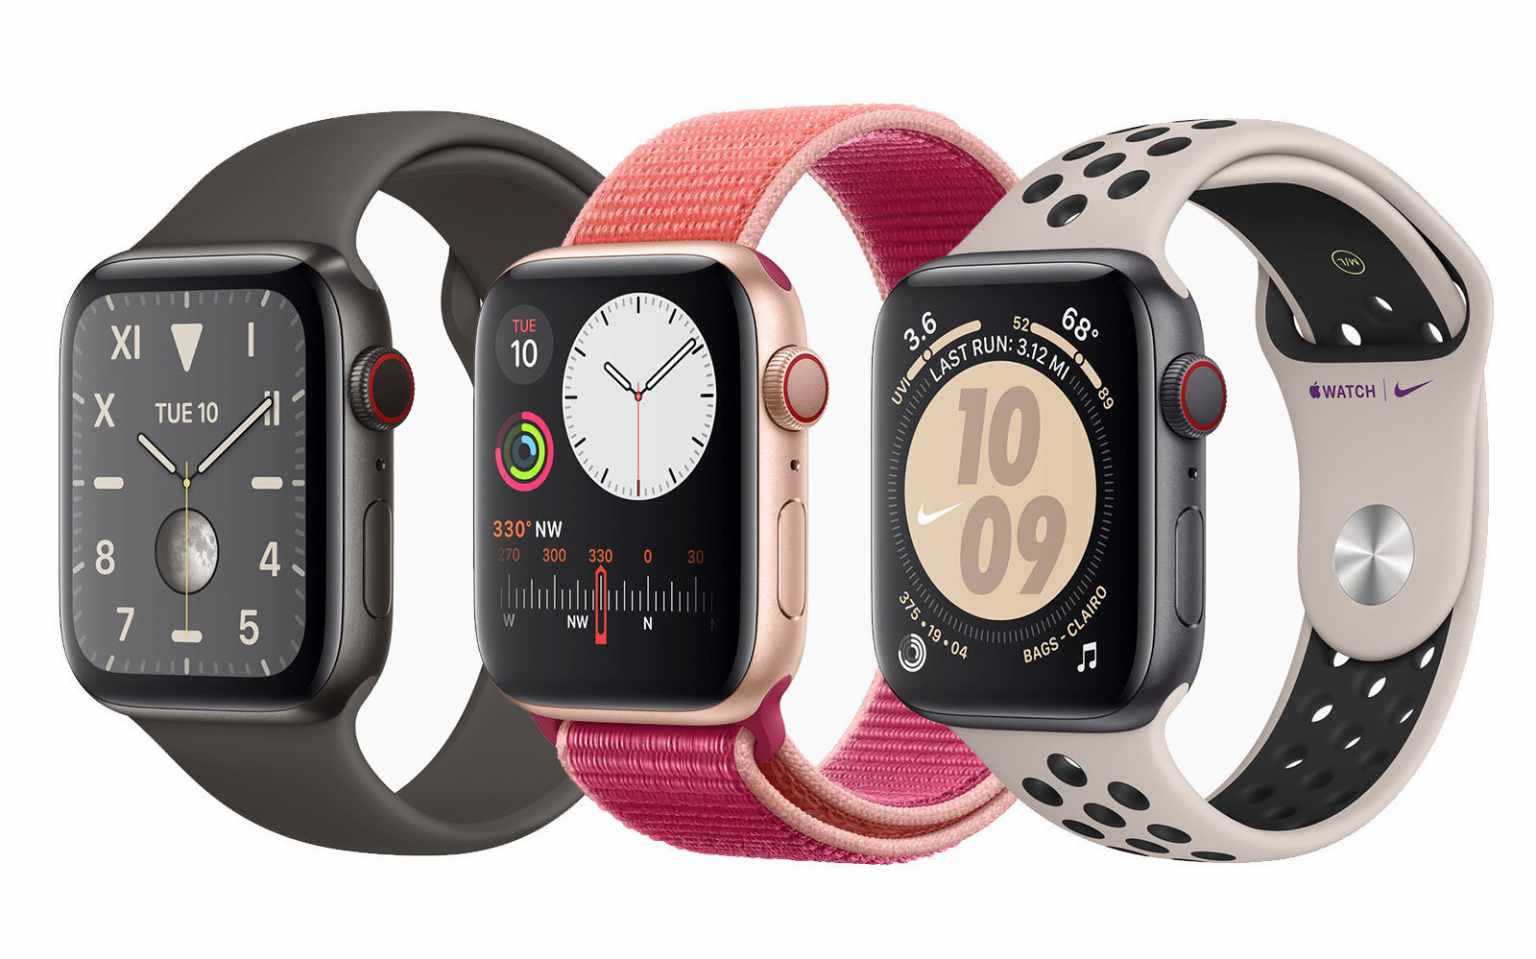 Apple Watch Series 5 With AlwaysOn Retina Display Launched Price in